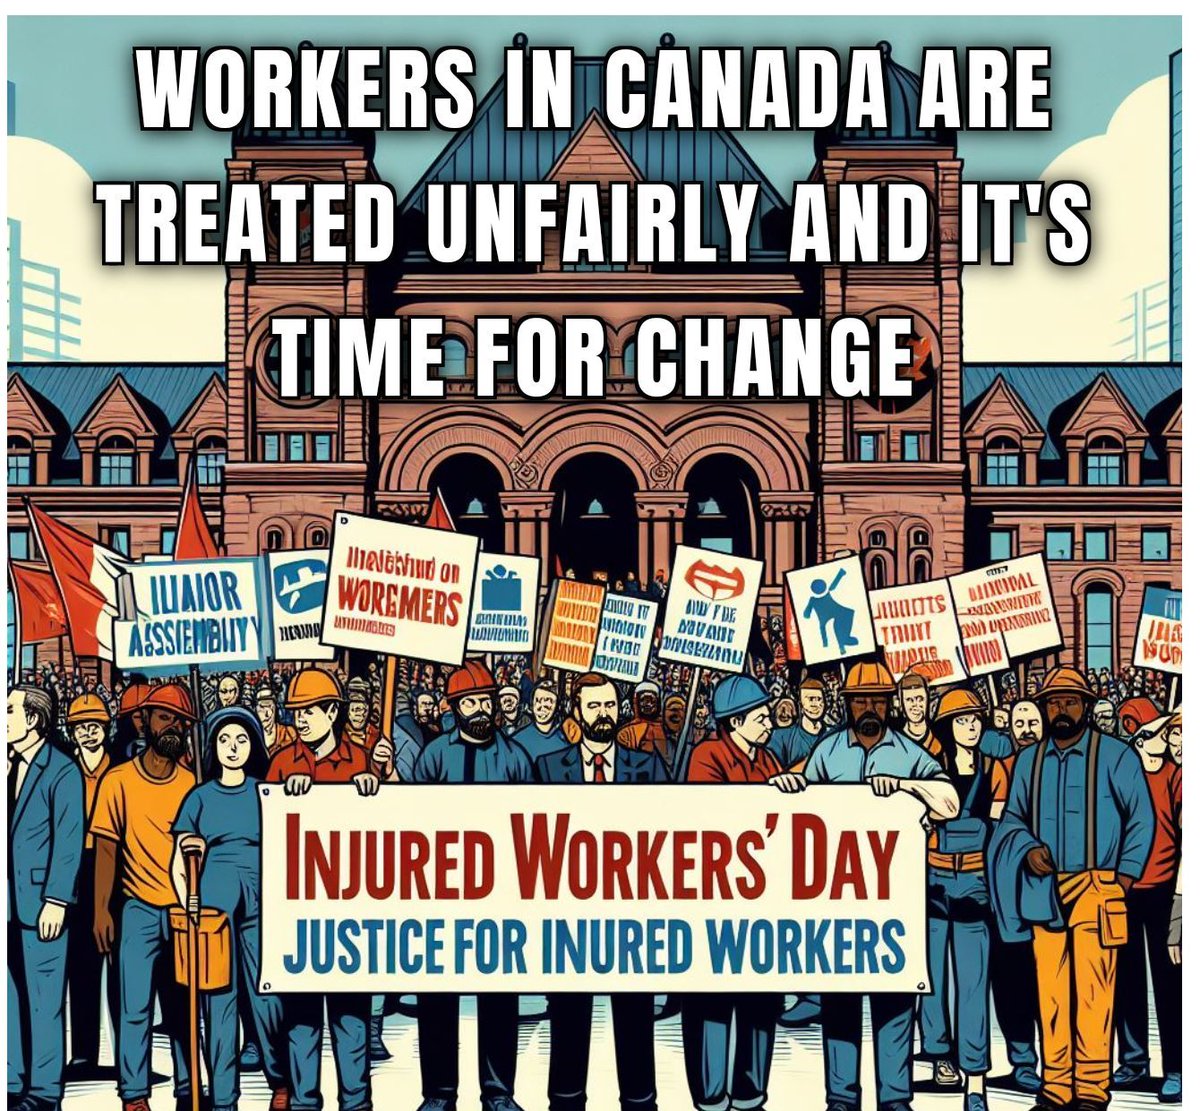 Workers in Canada are treated unfairly and it's time for change! Join us on June 1st for #InjuredWorkersDay as we demand justice for injured workers. Together, we can make a difference! ✊ #WorkersRights #Solidarity